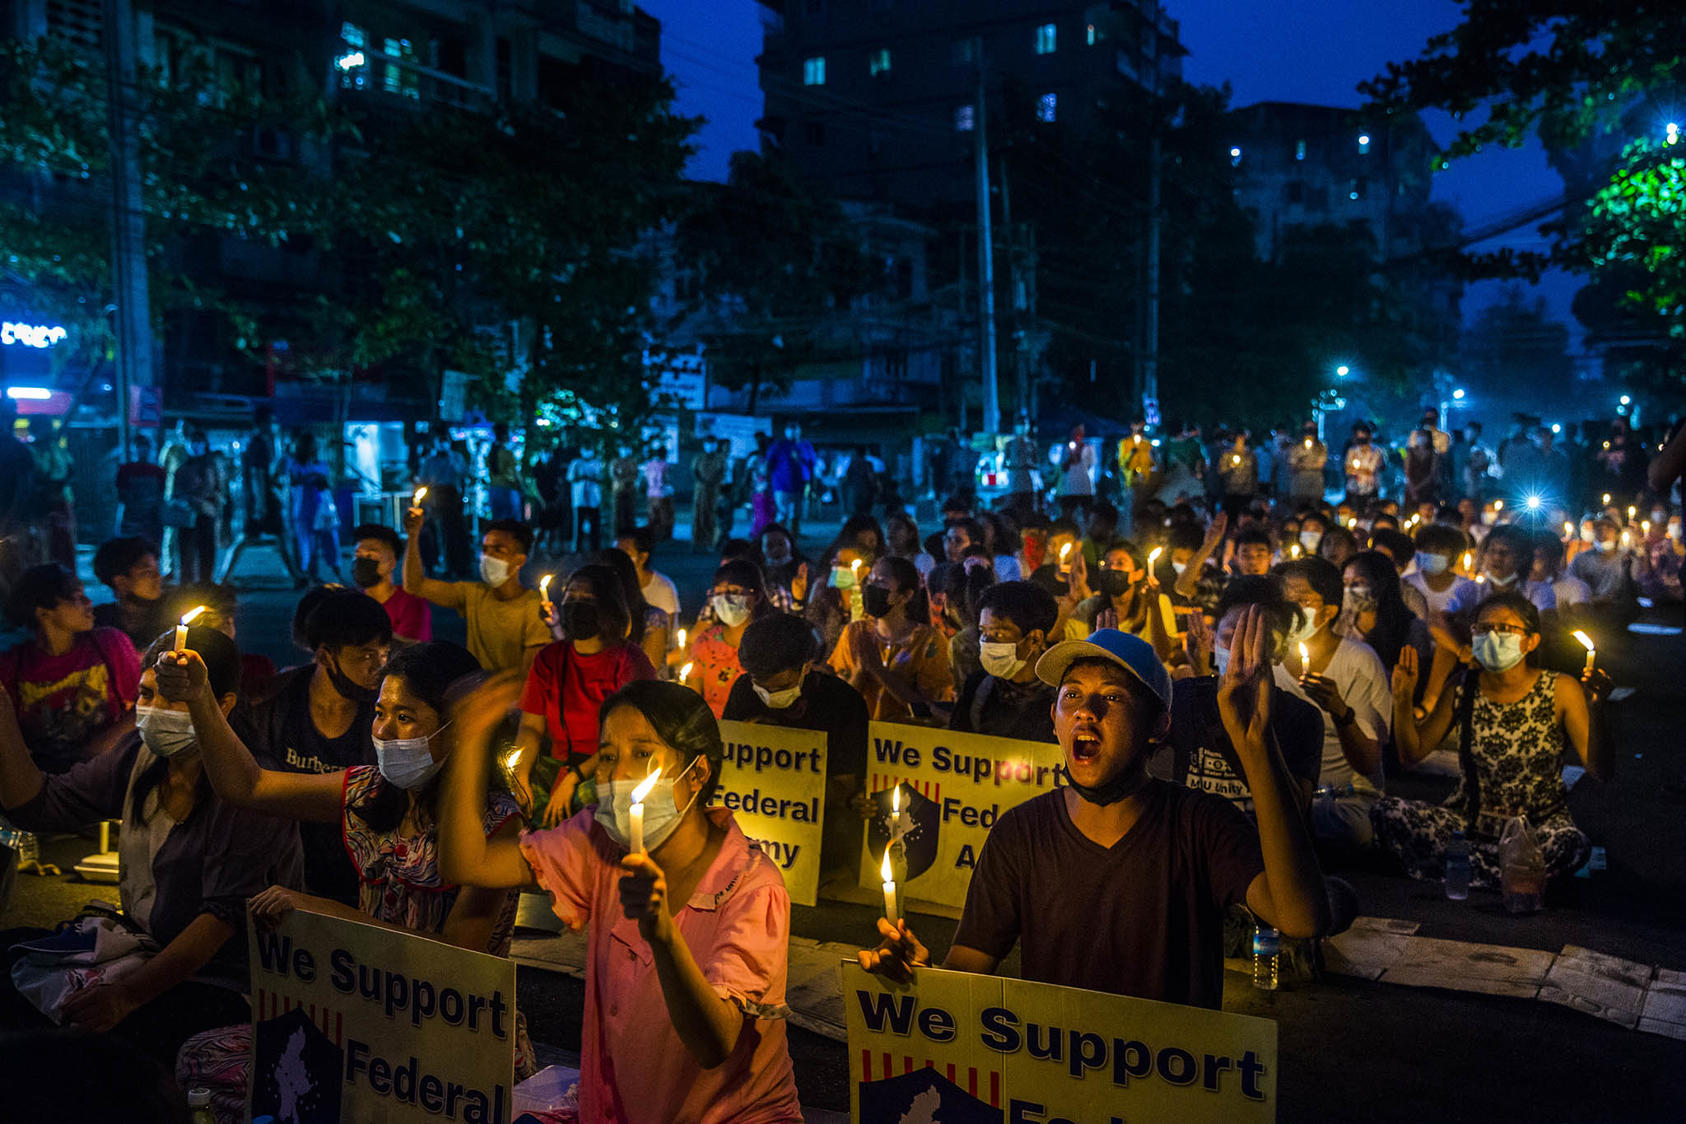 Anti-coup demonstrators, many with signs showing support for a civilian-formed federal army, hold candles and sing protest songs as they sit in the streets of Yangon, Myanmar, on Saturday, April 3, 2021. (The New York Times)